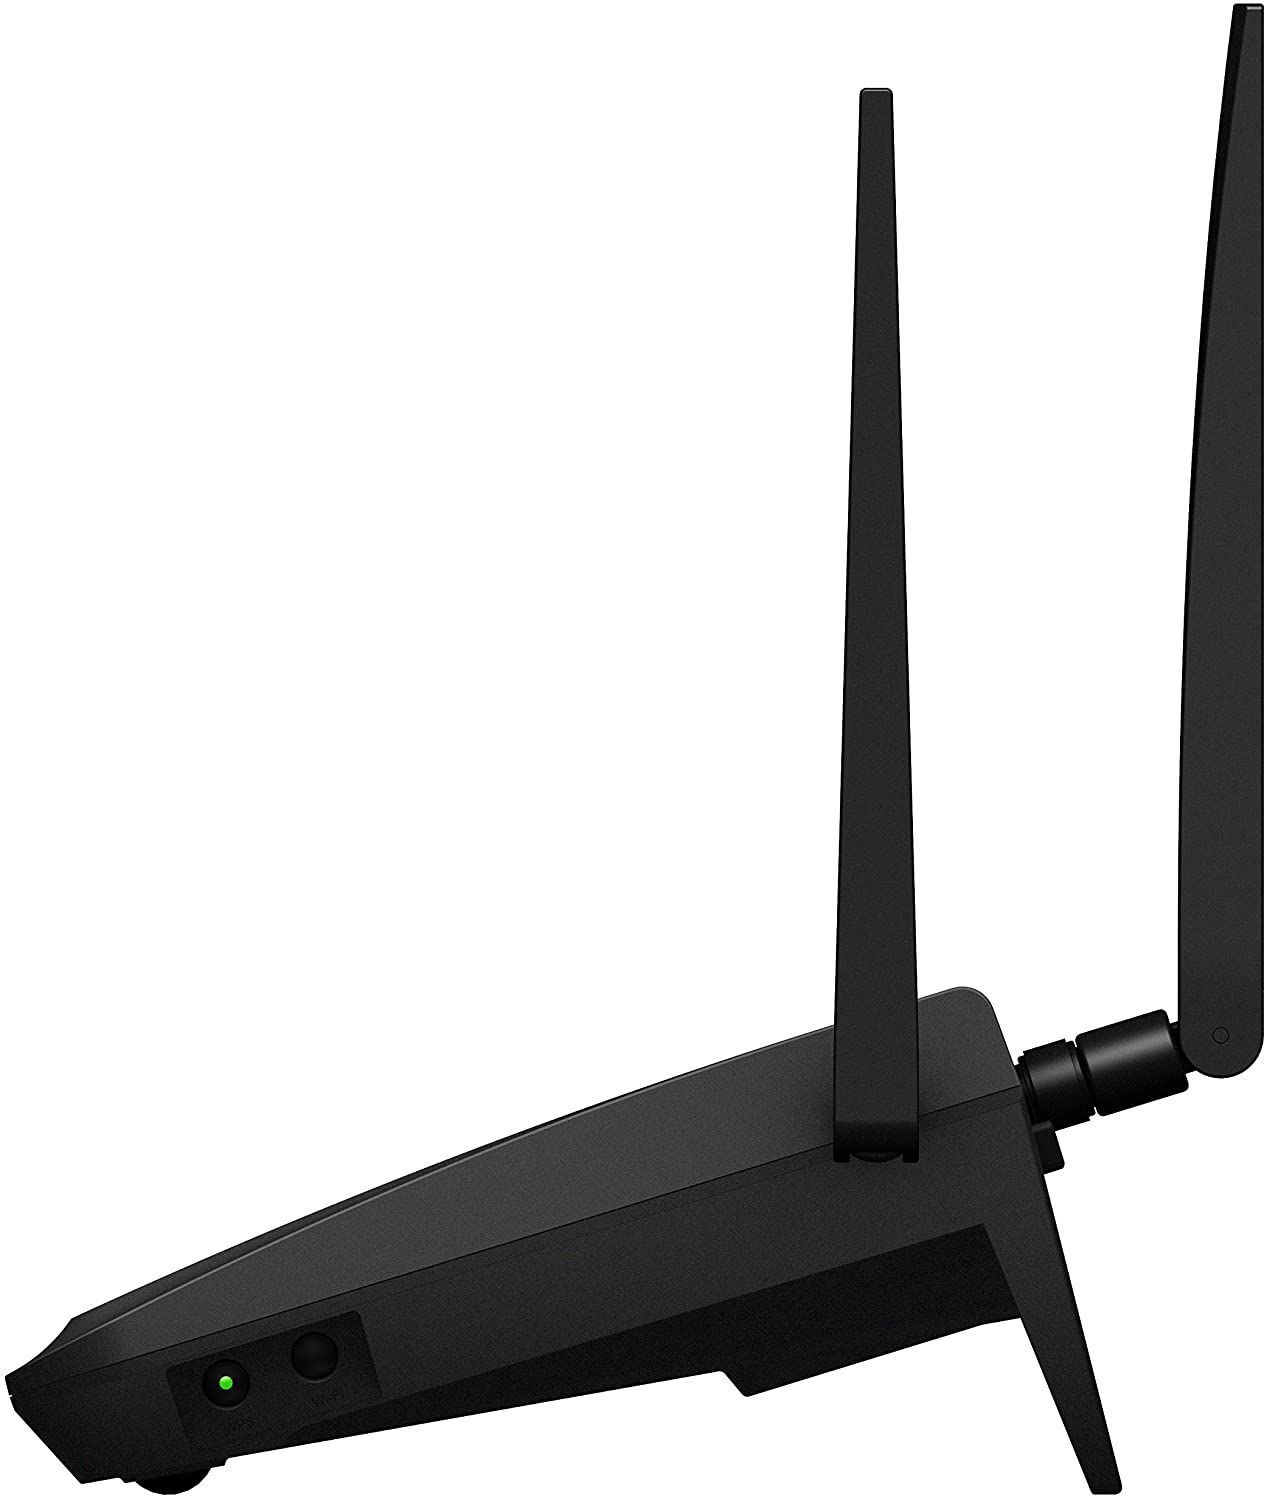 Synology Parental Control Router RT2600ac side view